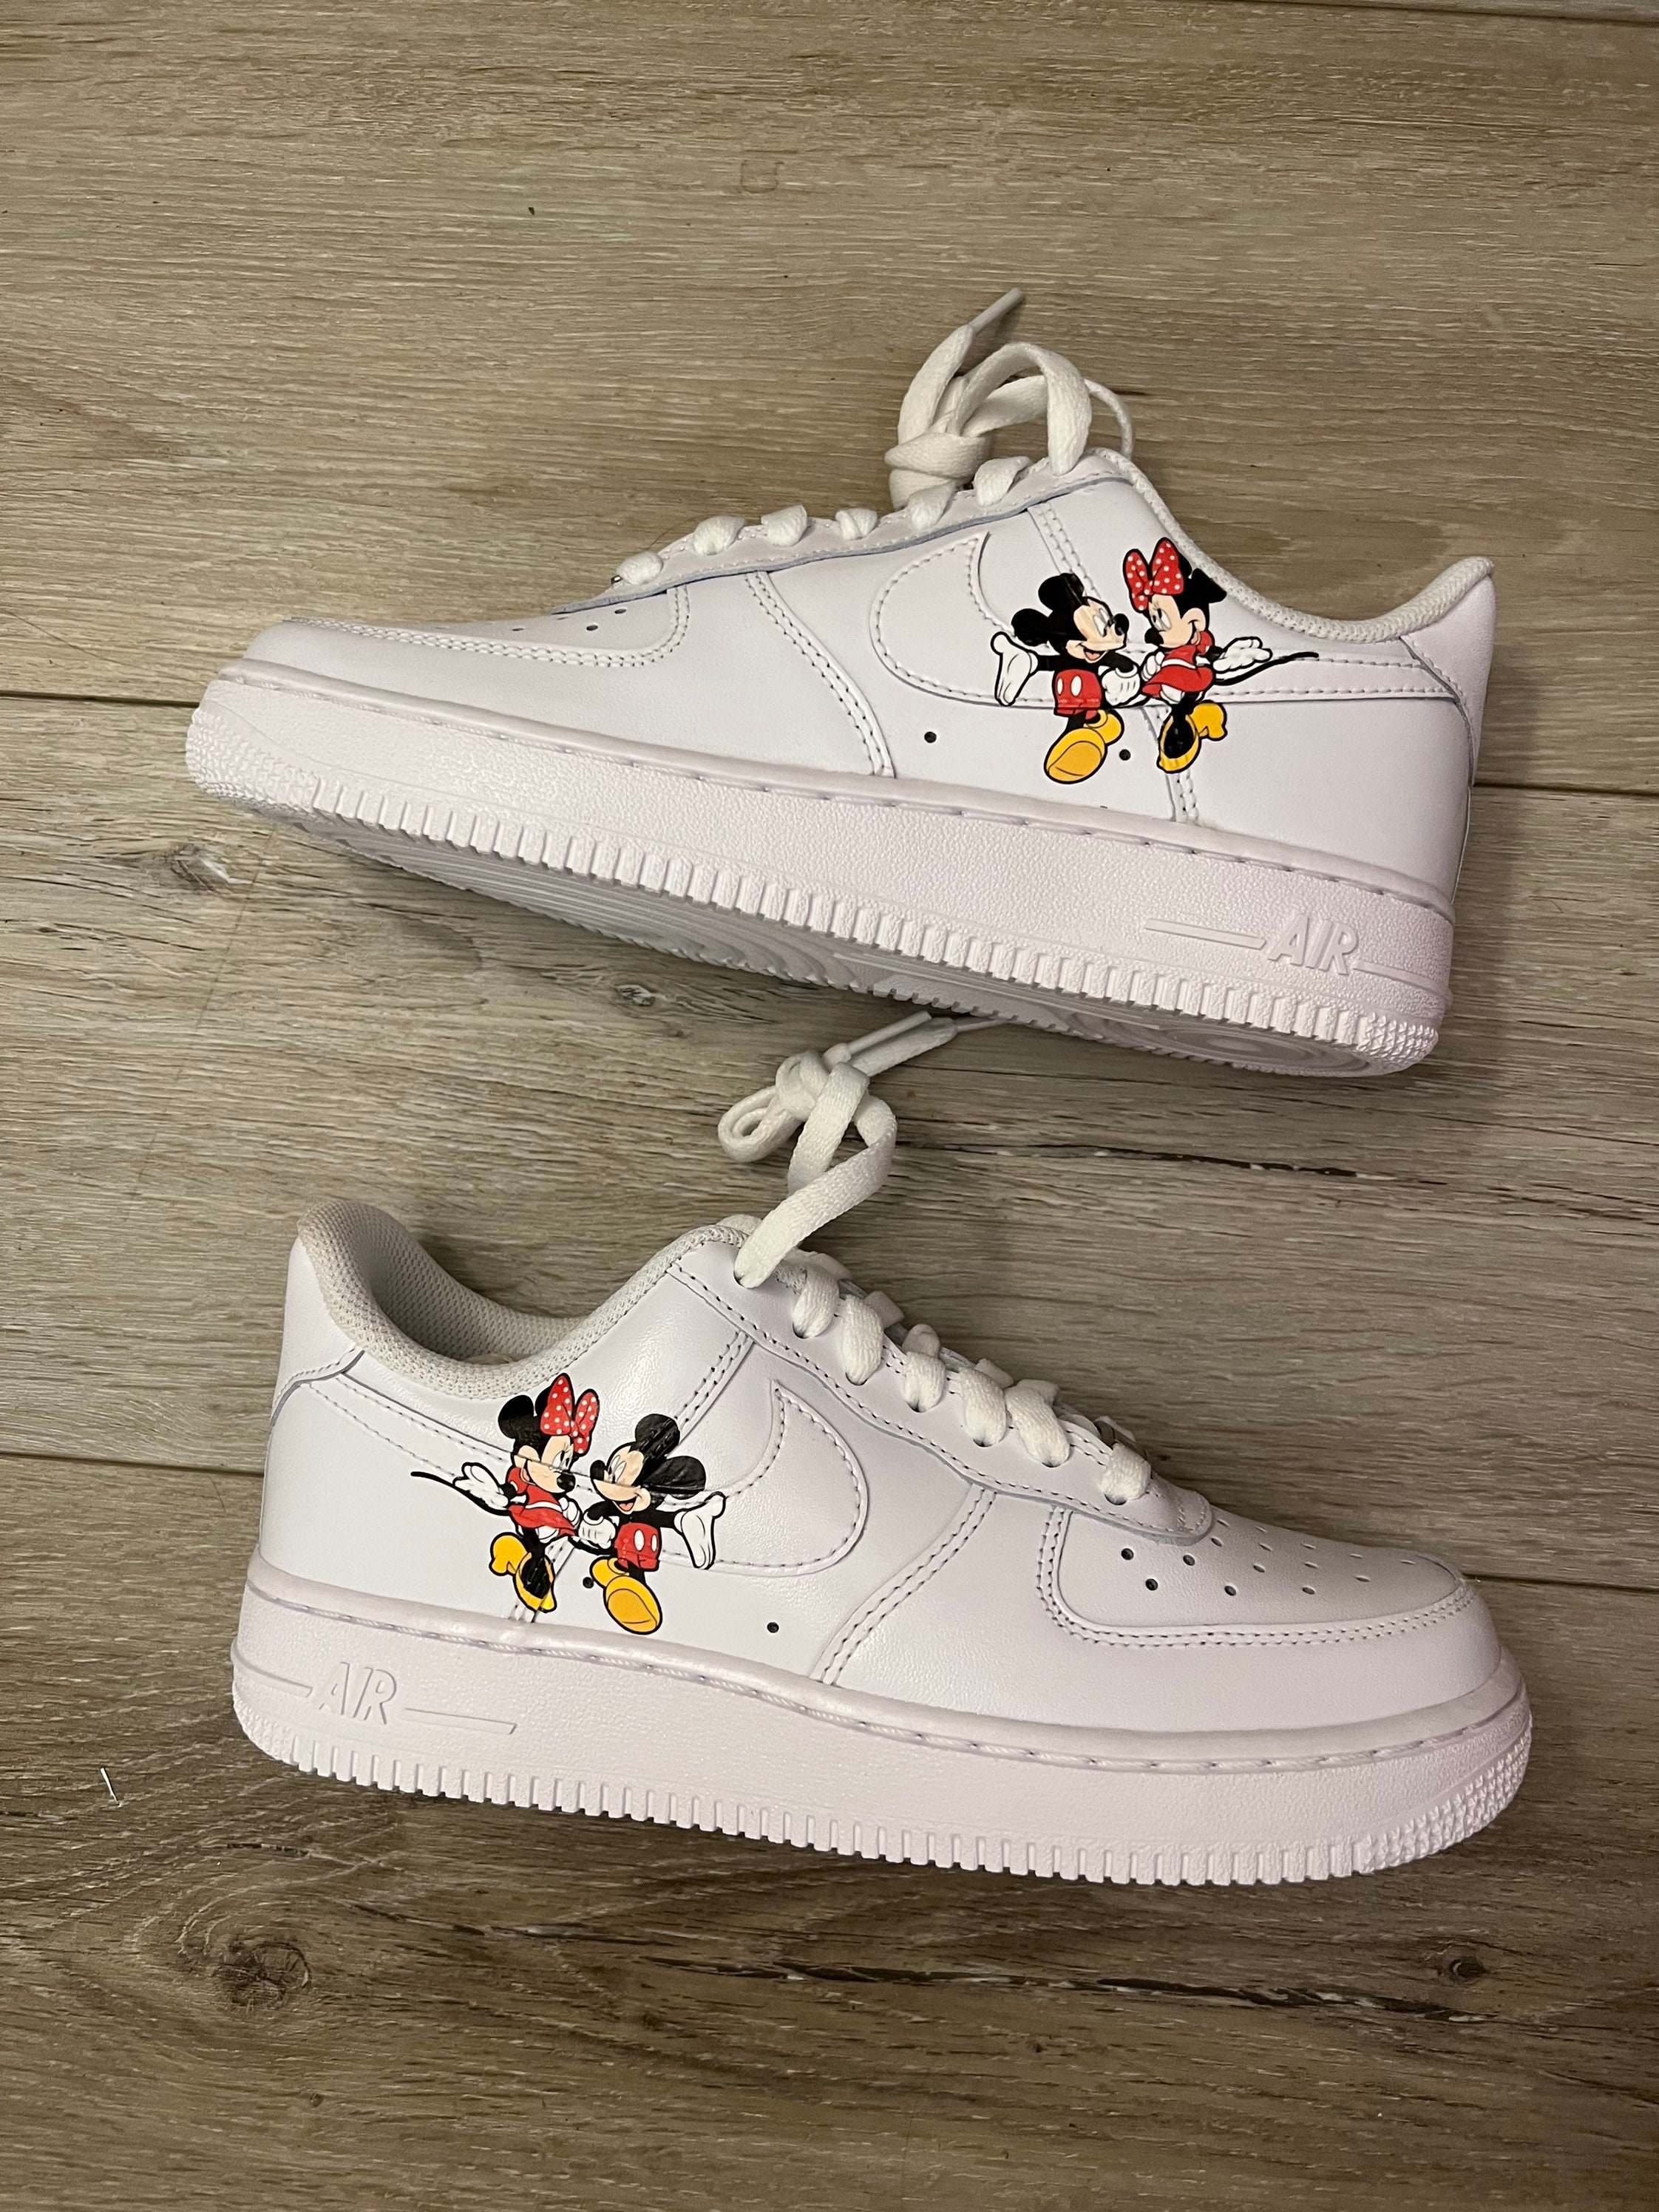 Mickey Mouse Nike - Etsy